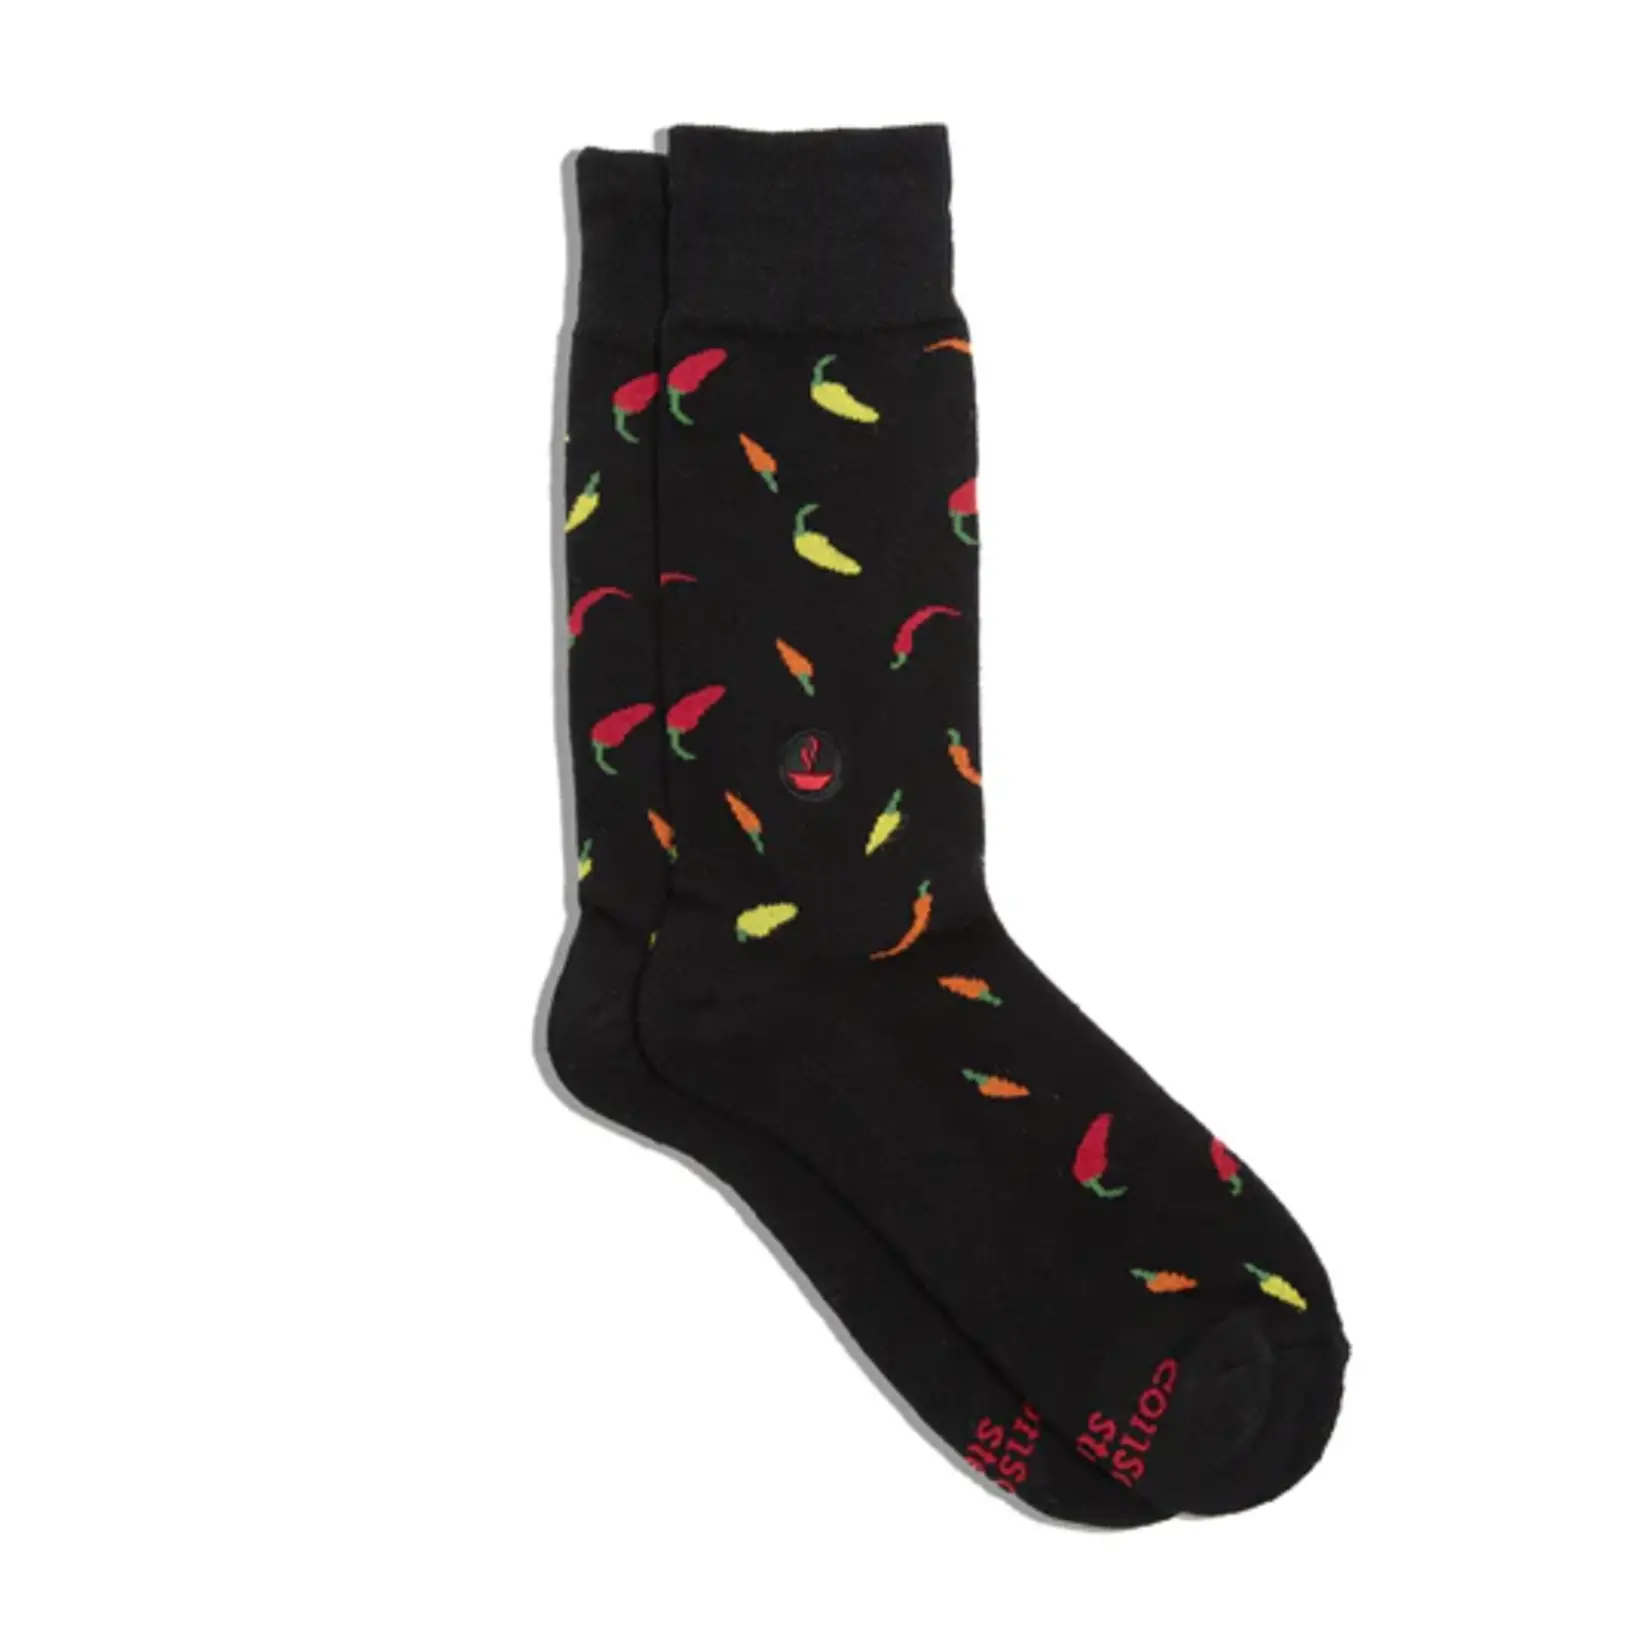 Conscious Step Socks that Provide Meals | Small